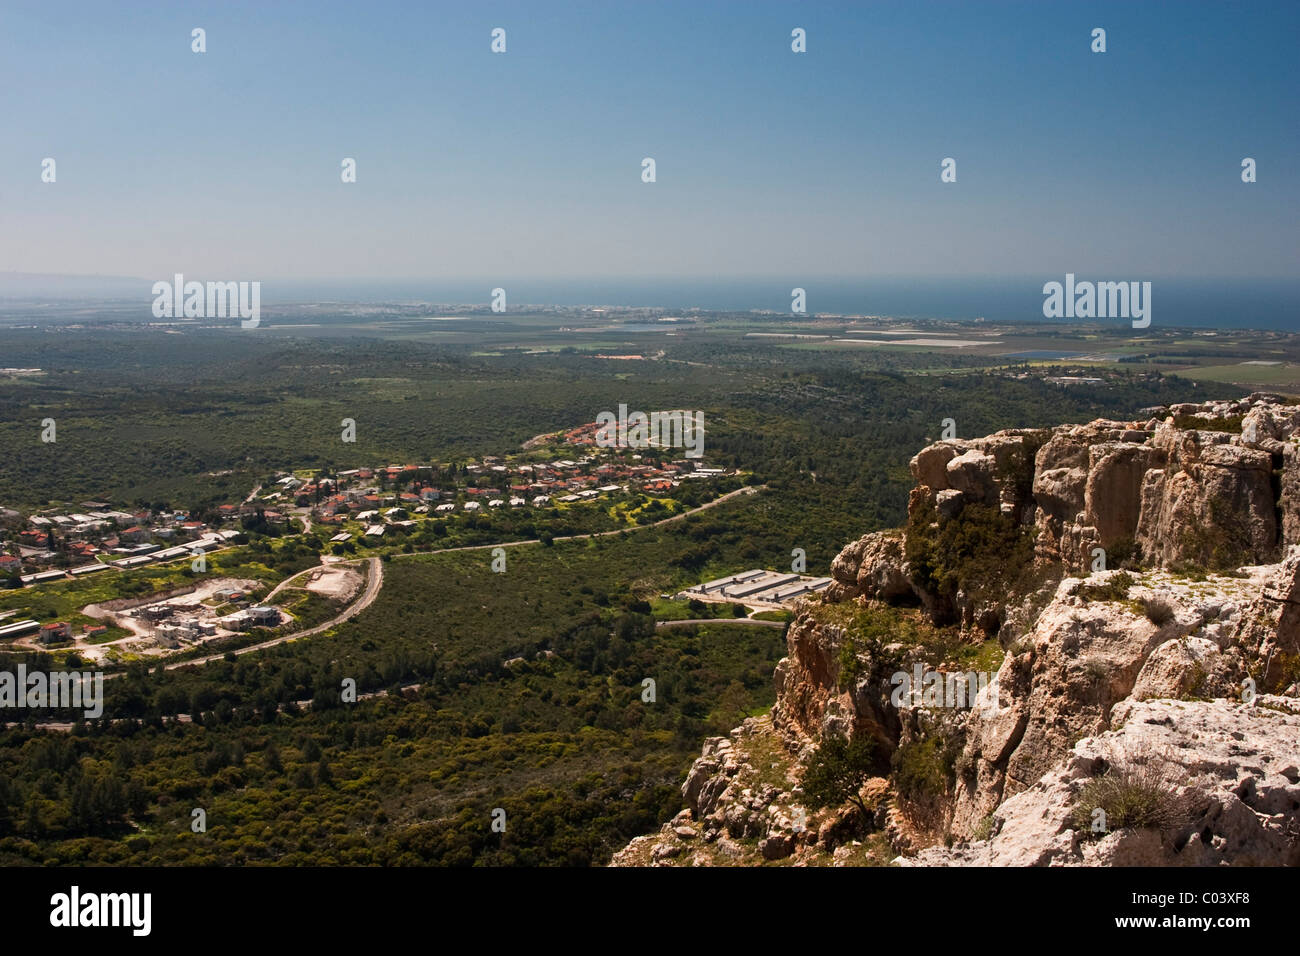 View of the Galilee and the coast of Rosh Hanikra Stock Photo